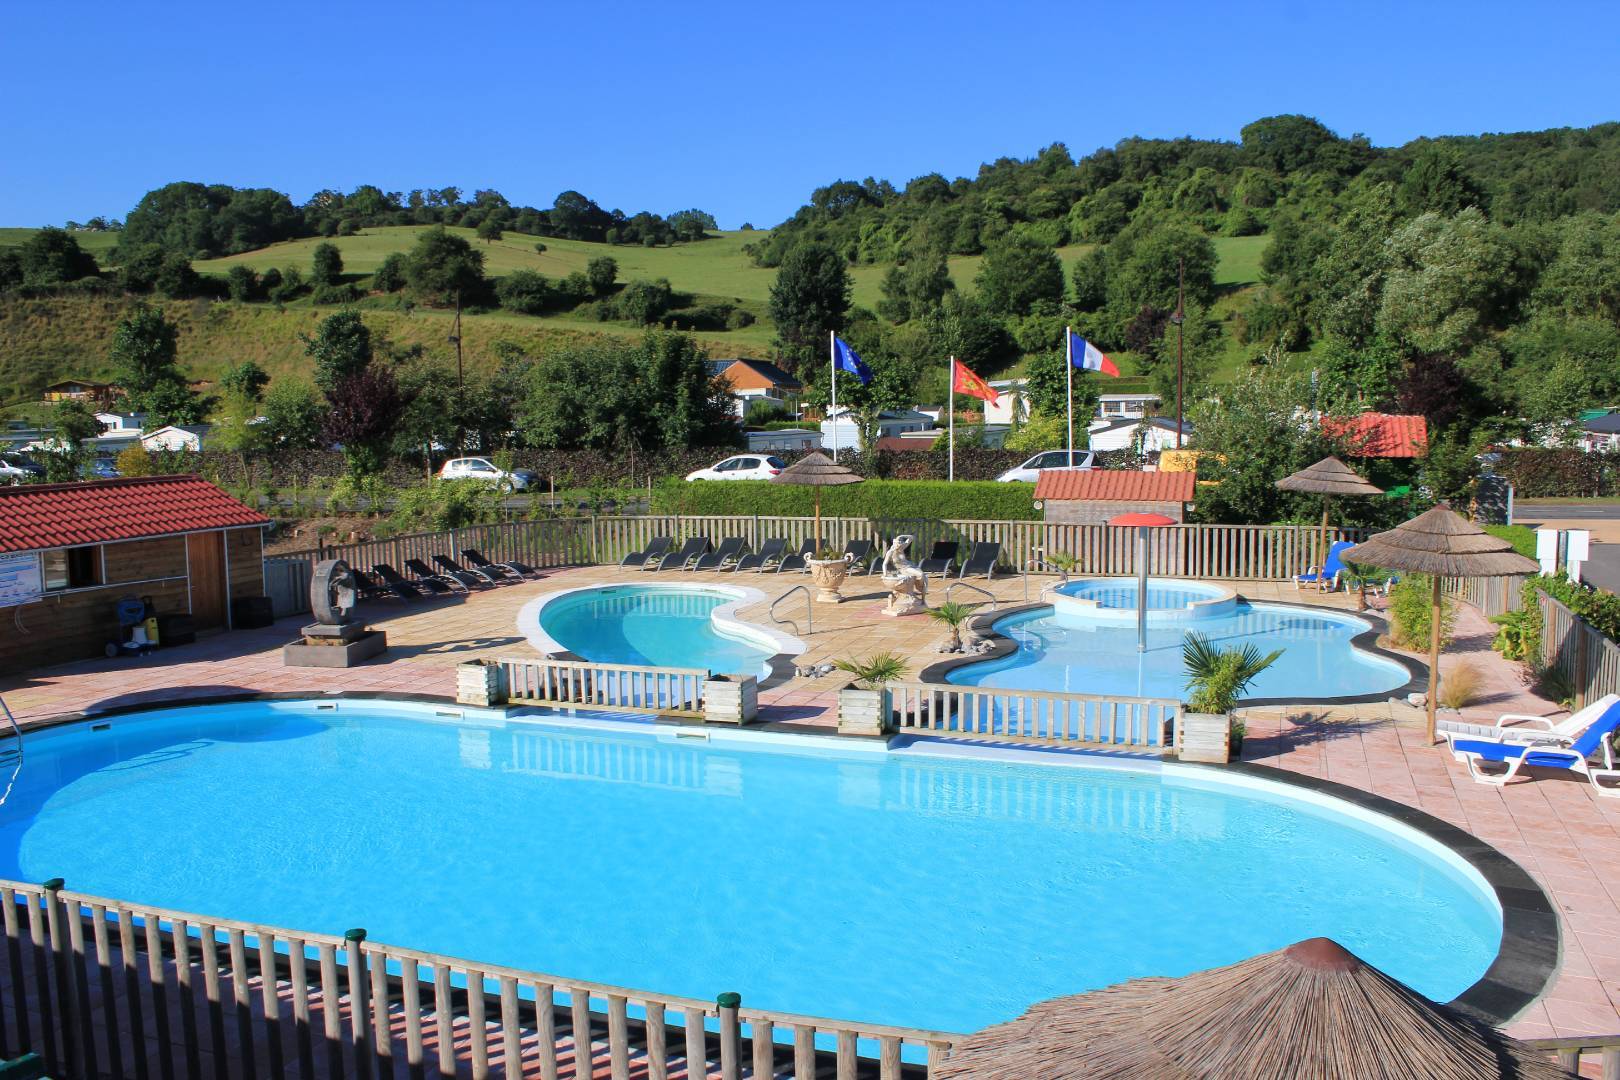 Camping Le Marqueval